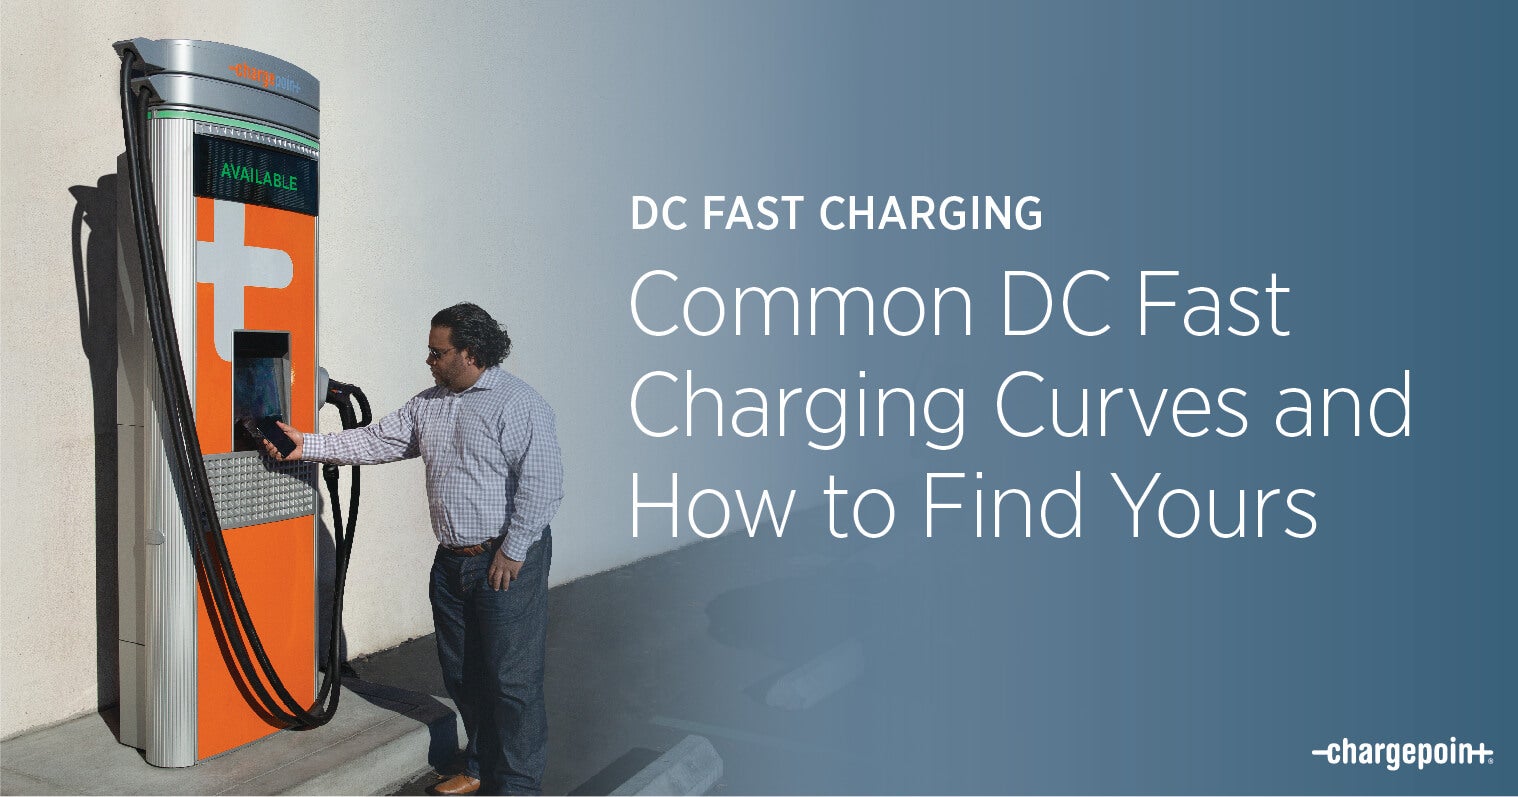 https://www.chargepoint.com/sites/default/files/blog-photos/2019-02/DC-Fast-Charging-Curve-Common-DC-Fast-Curves-Blog-Header_1.jpg